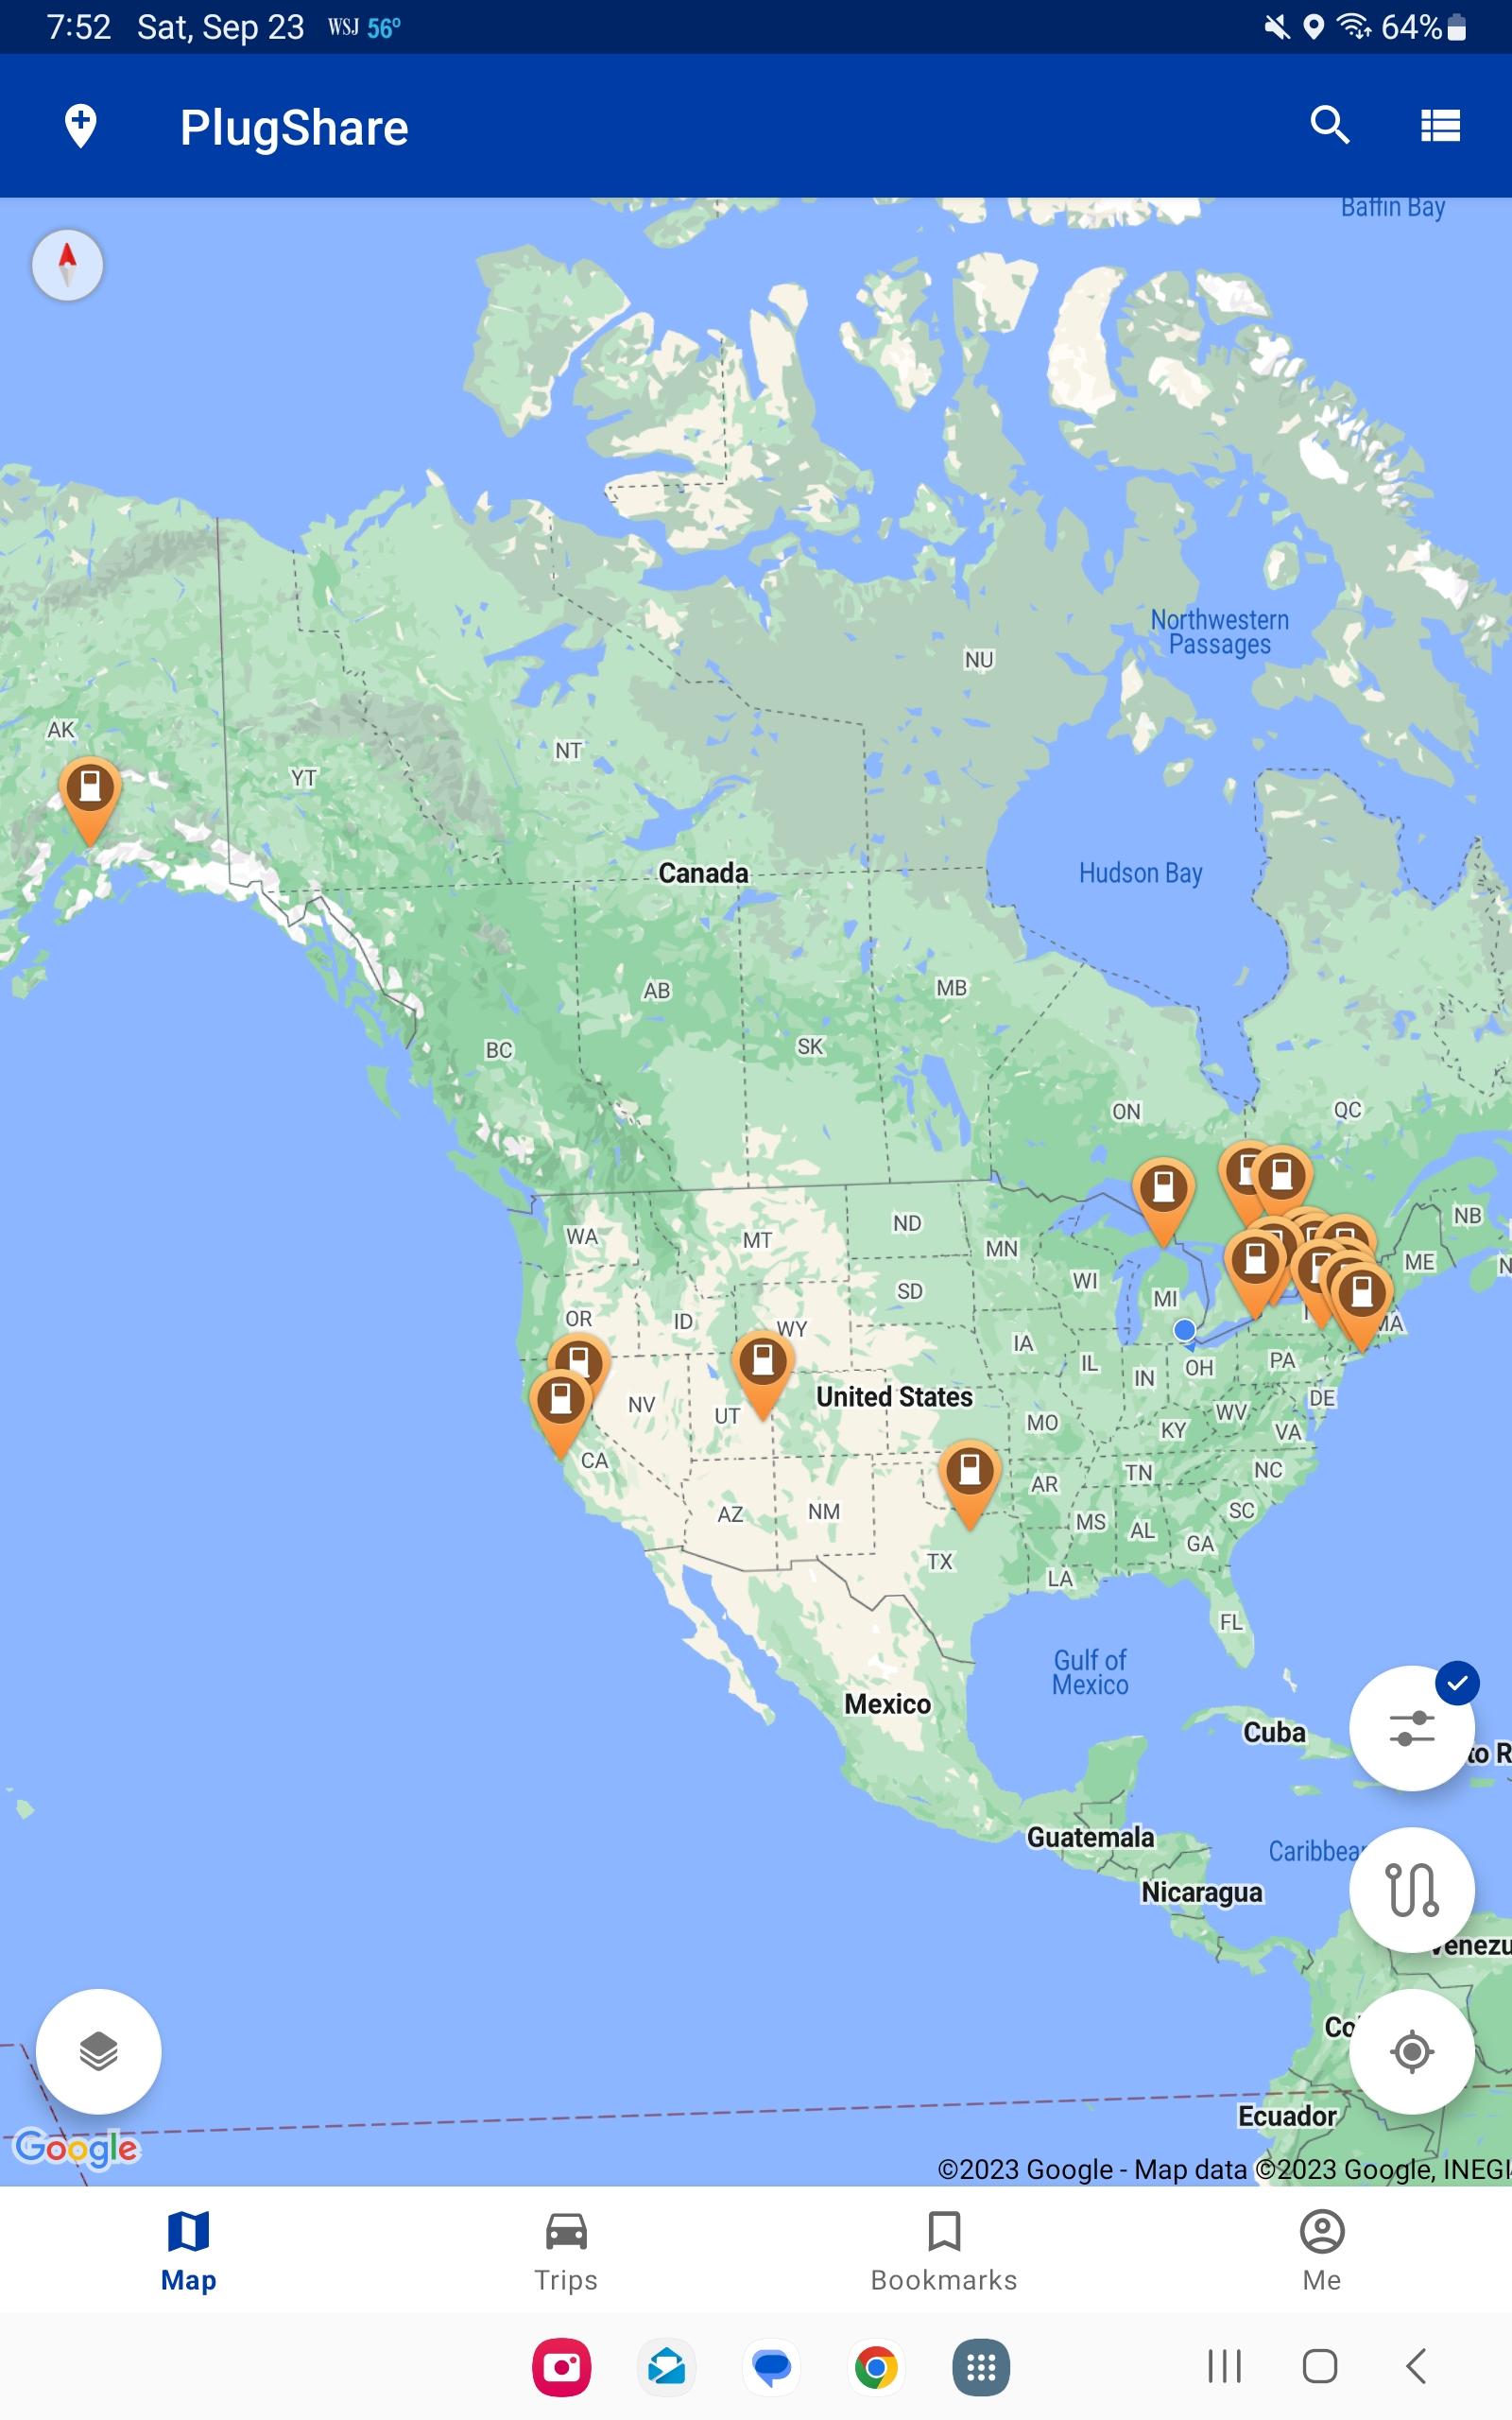 Ford F-150 Lightning Tesla Supercharger network now up to 57 locations with Magic Dock (3/19/24) Screenshot_20230923_075245_PlugShare